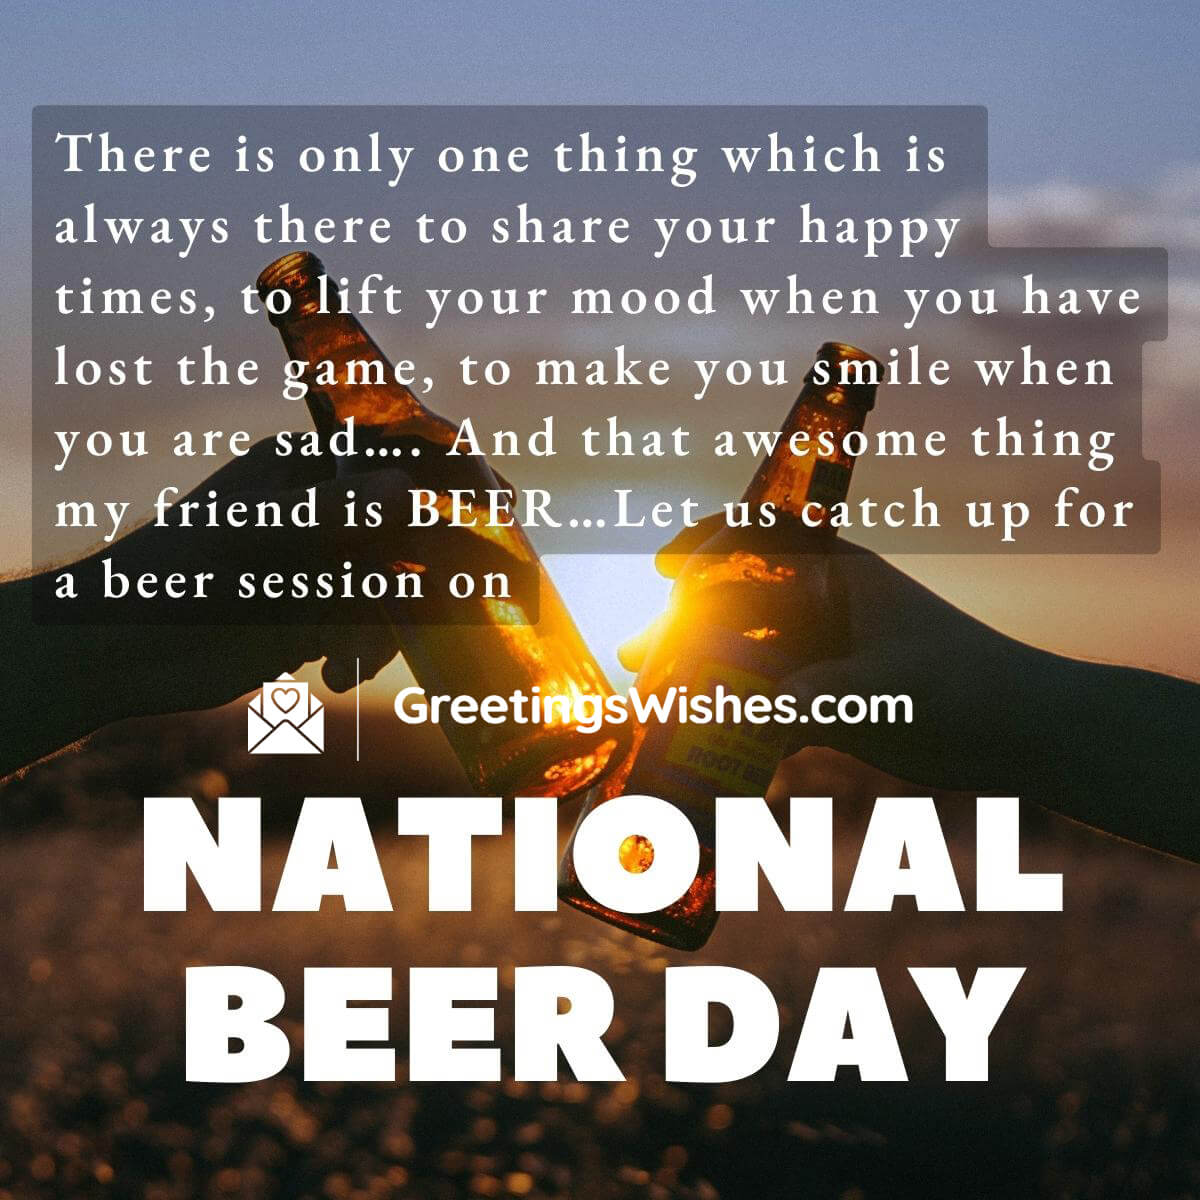 National Beer Day Message